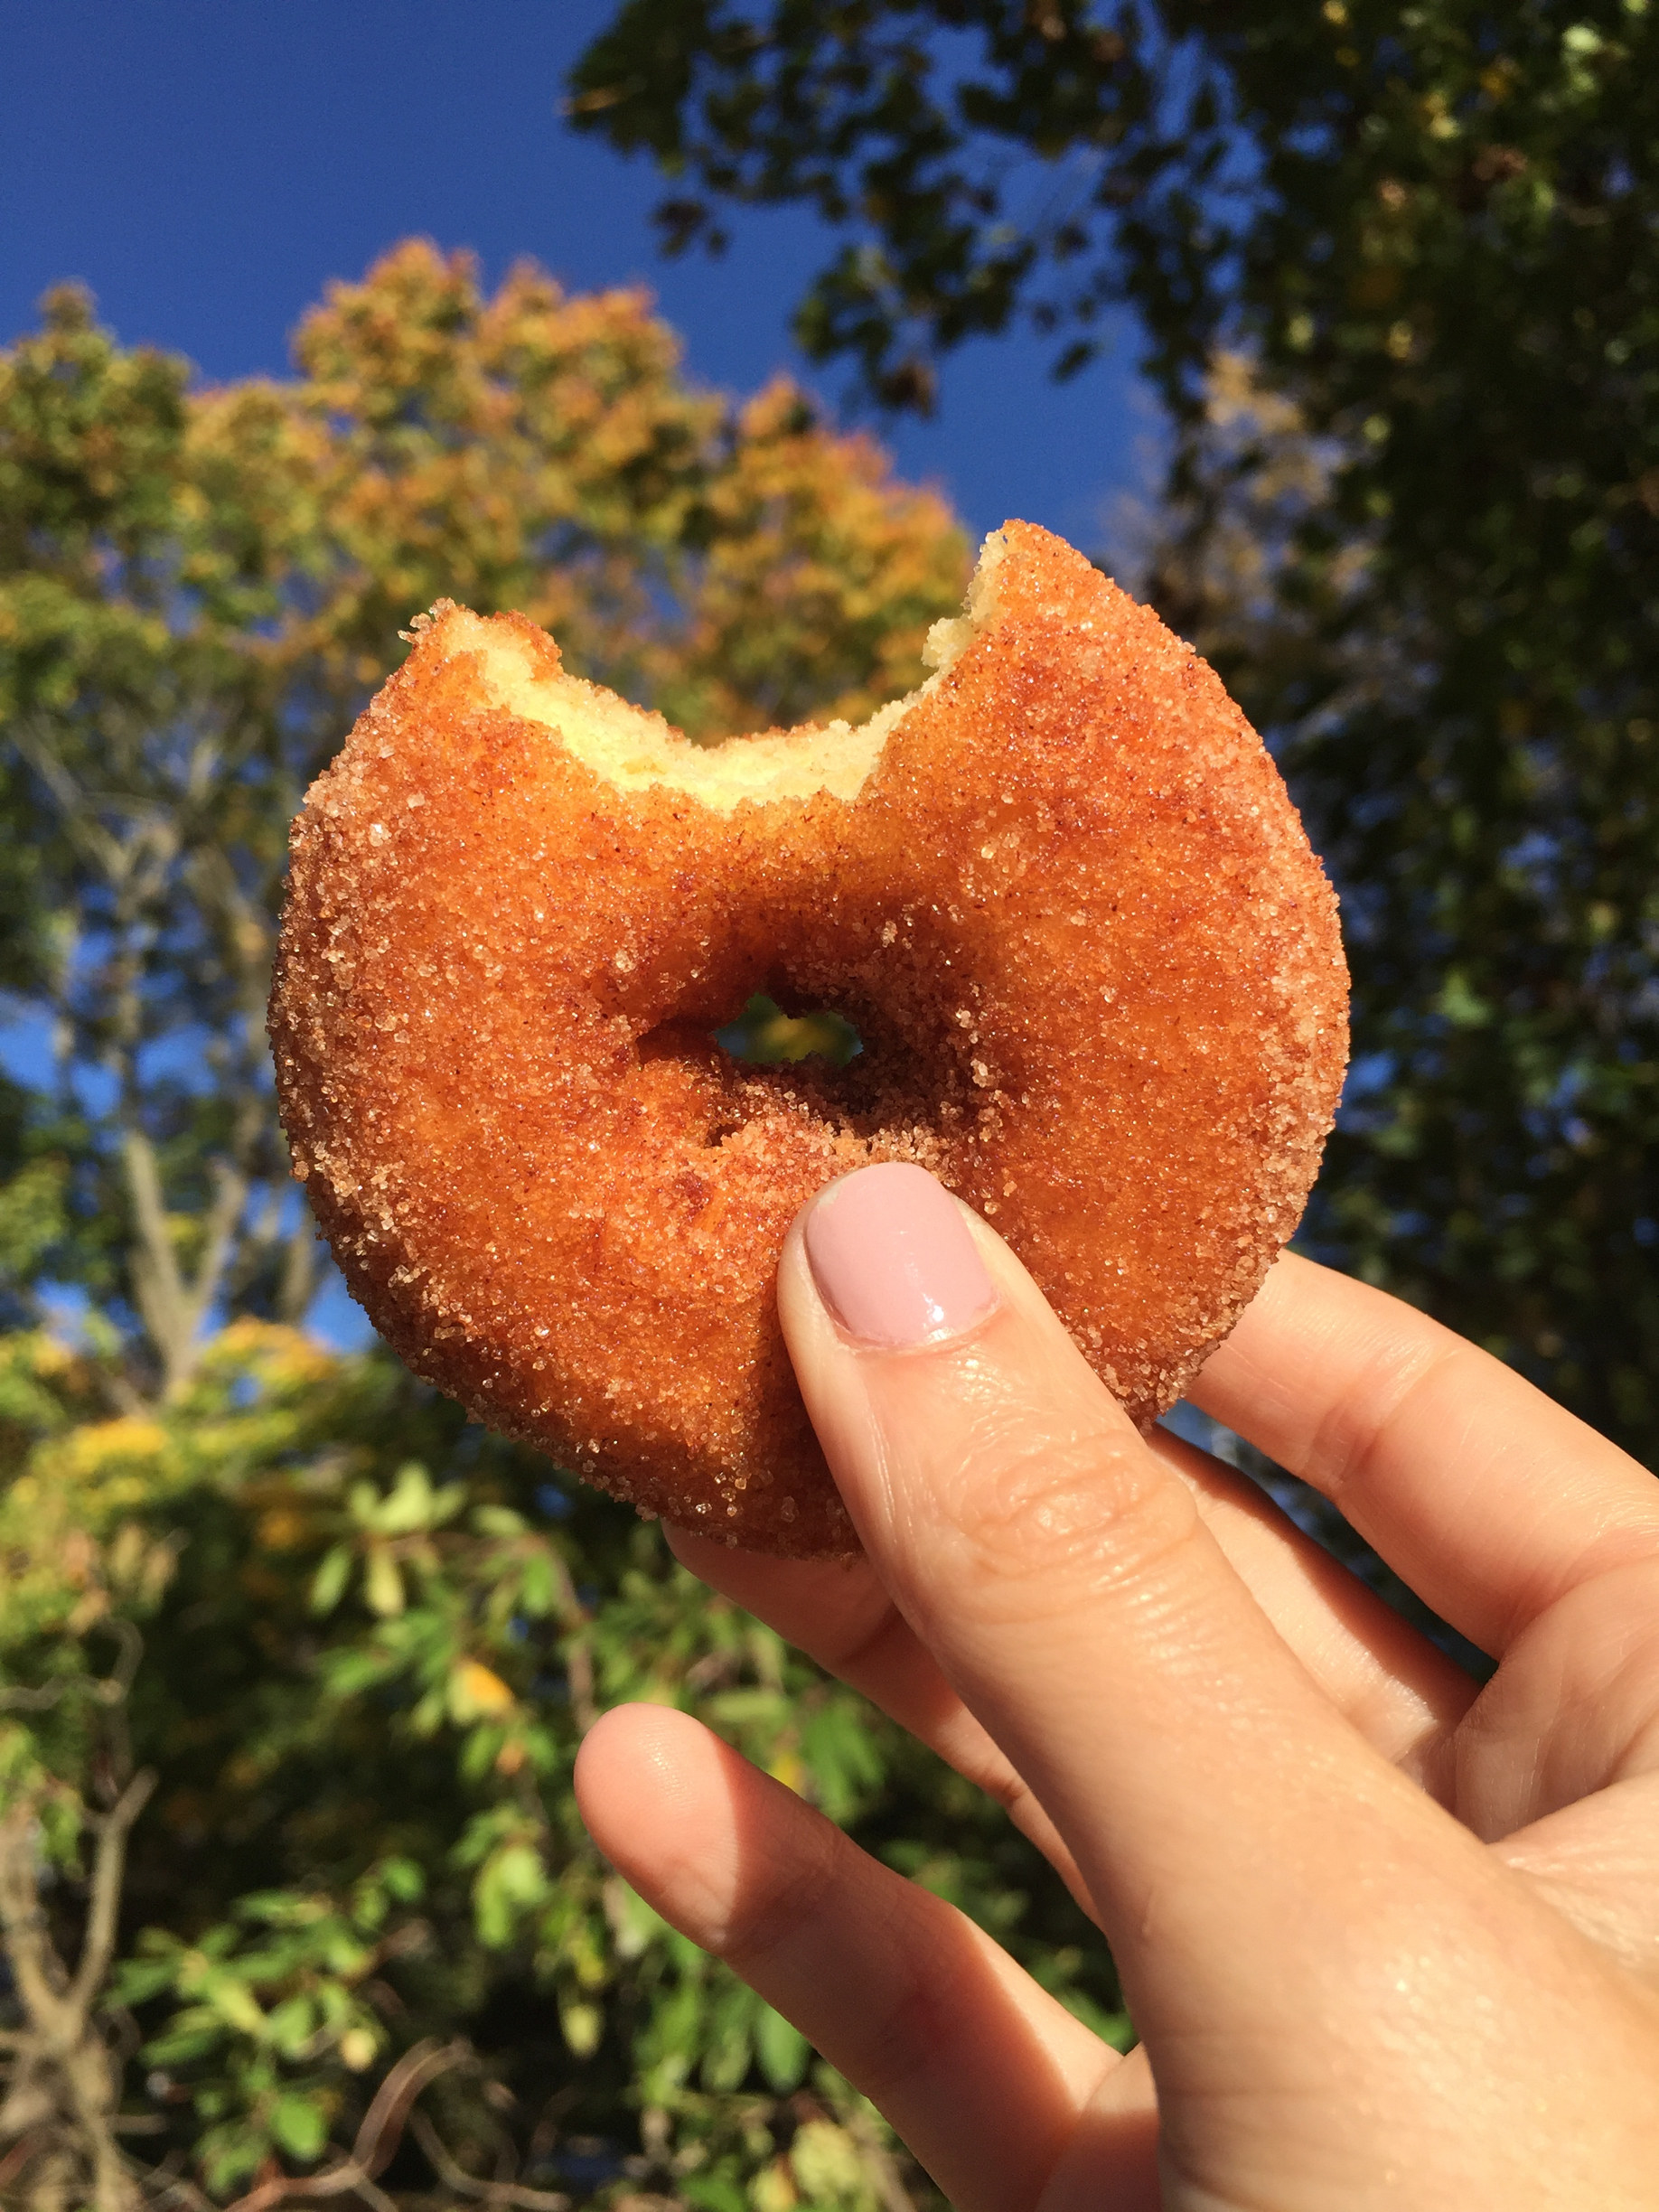 An apple cider donut with a bite taken from it.